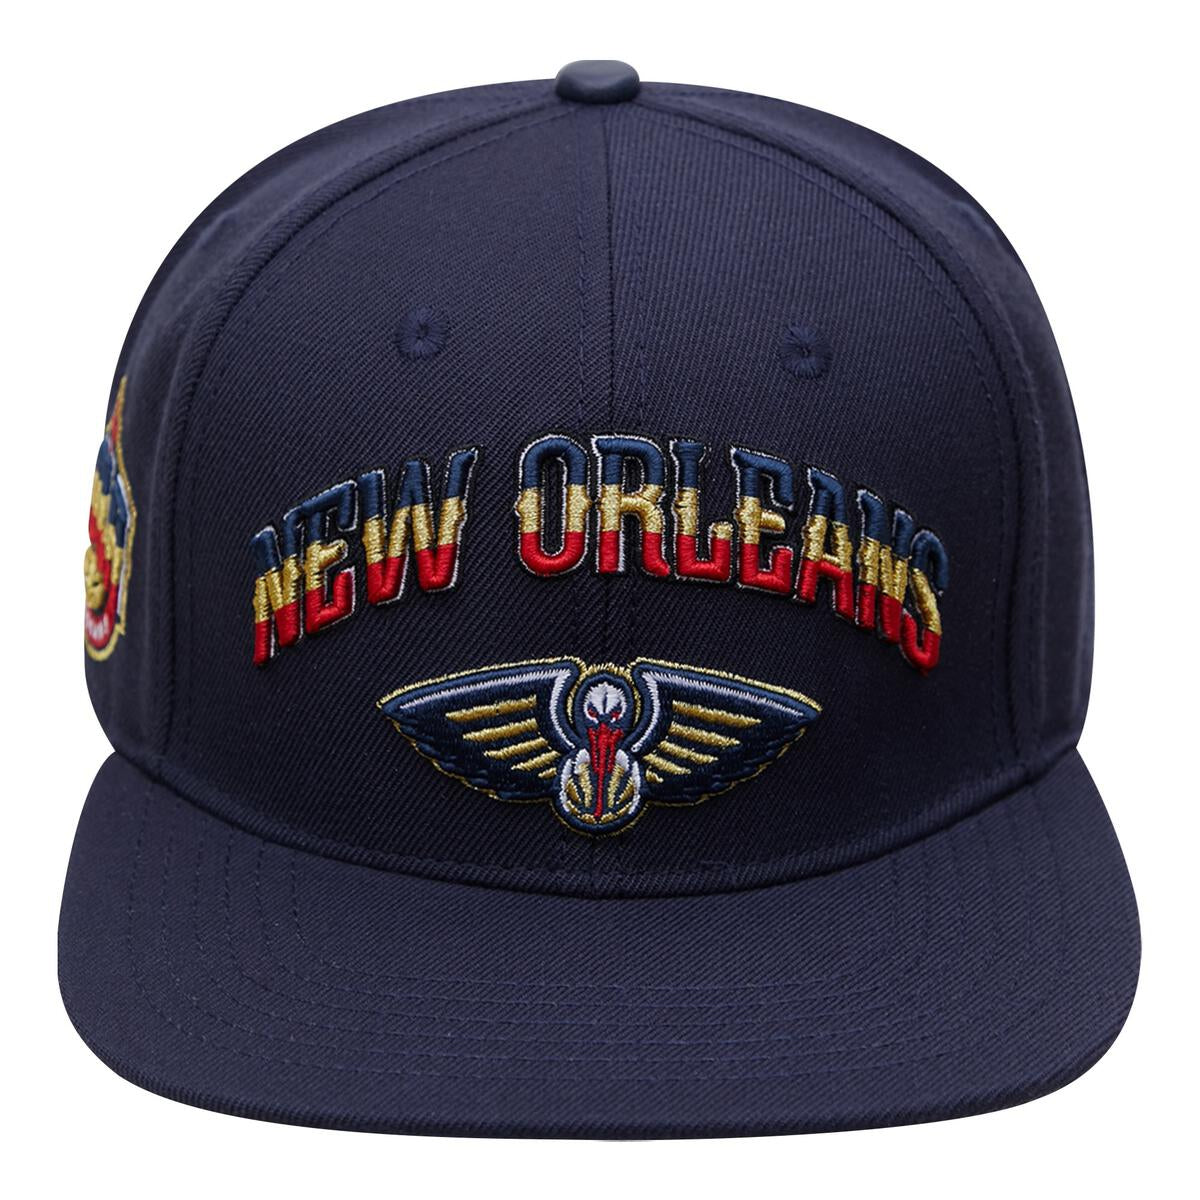 New Orleans Pelicans on X: 🎭🎭🎭  / X